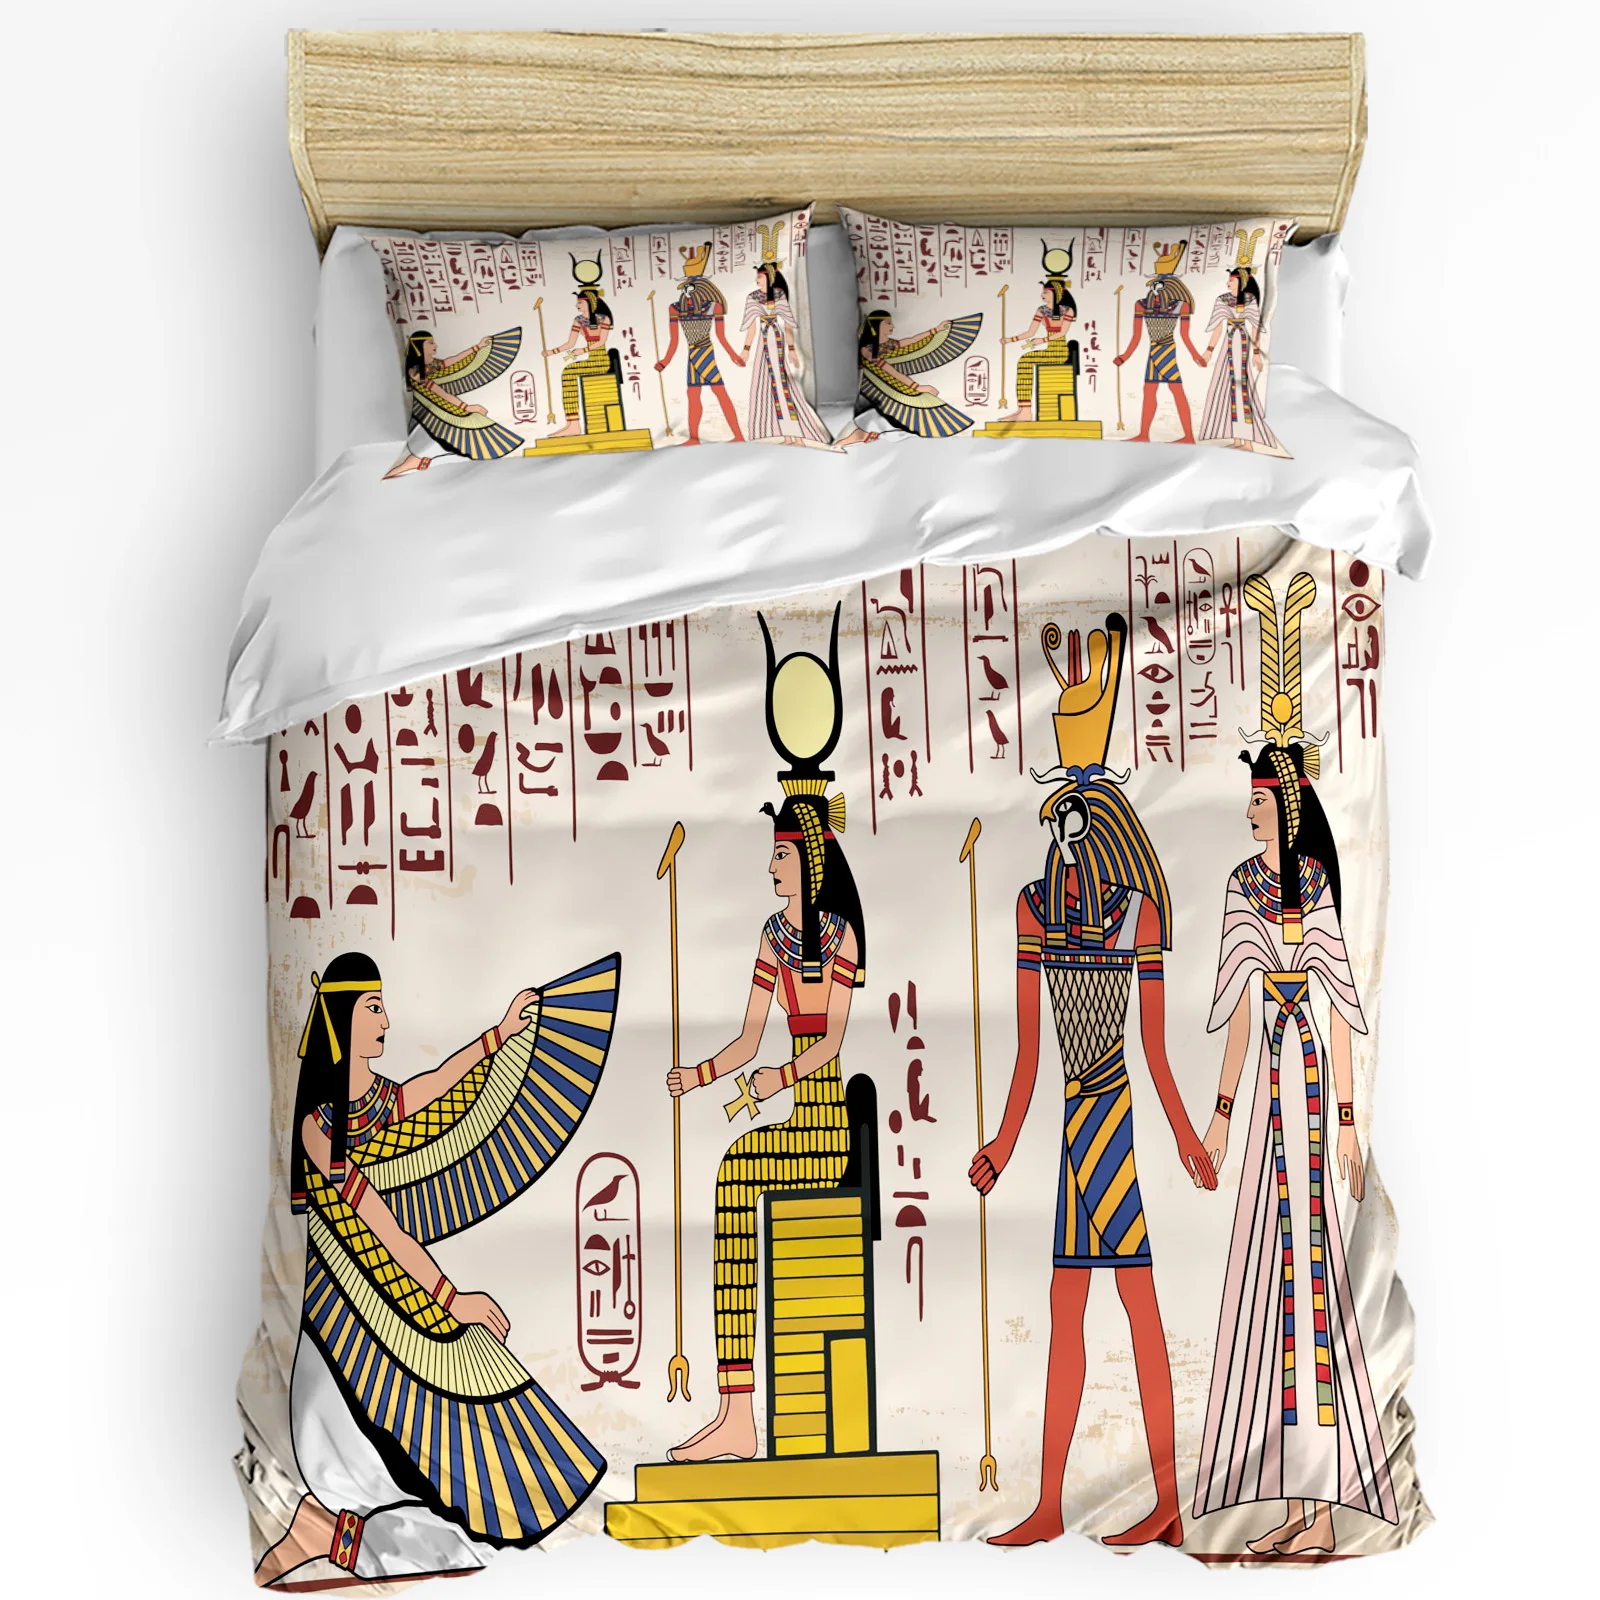 

Egyptian Mural Culture Ancient Art 3pcs Bedding Set For Bedroom Double Bed Home Textile Duvet Cover Quilt Cover Pillowcase